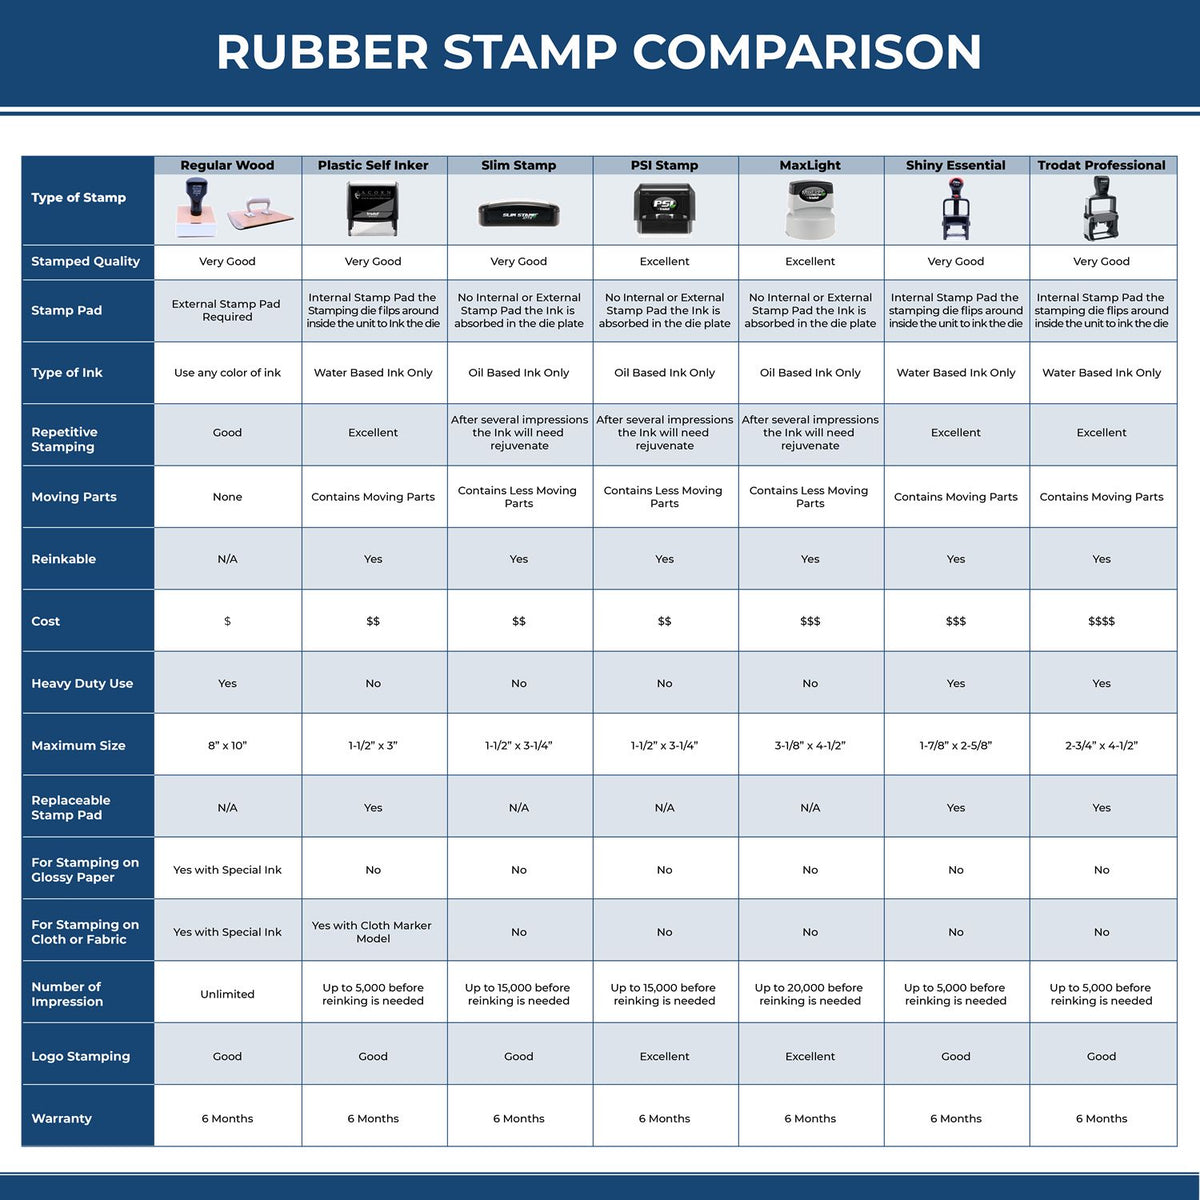 A comparison chart for the different types of mount models available for the Premium MaxLight Pre-Inked Kansas Engineering Stamp.